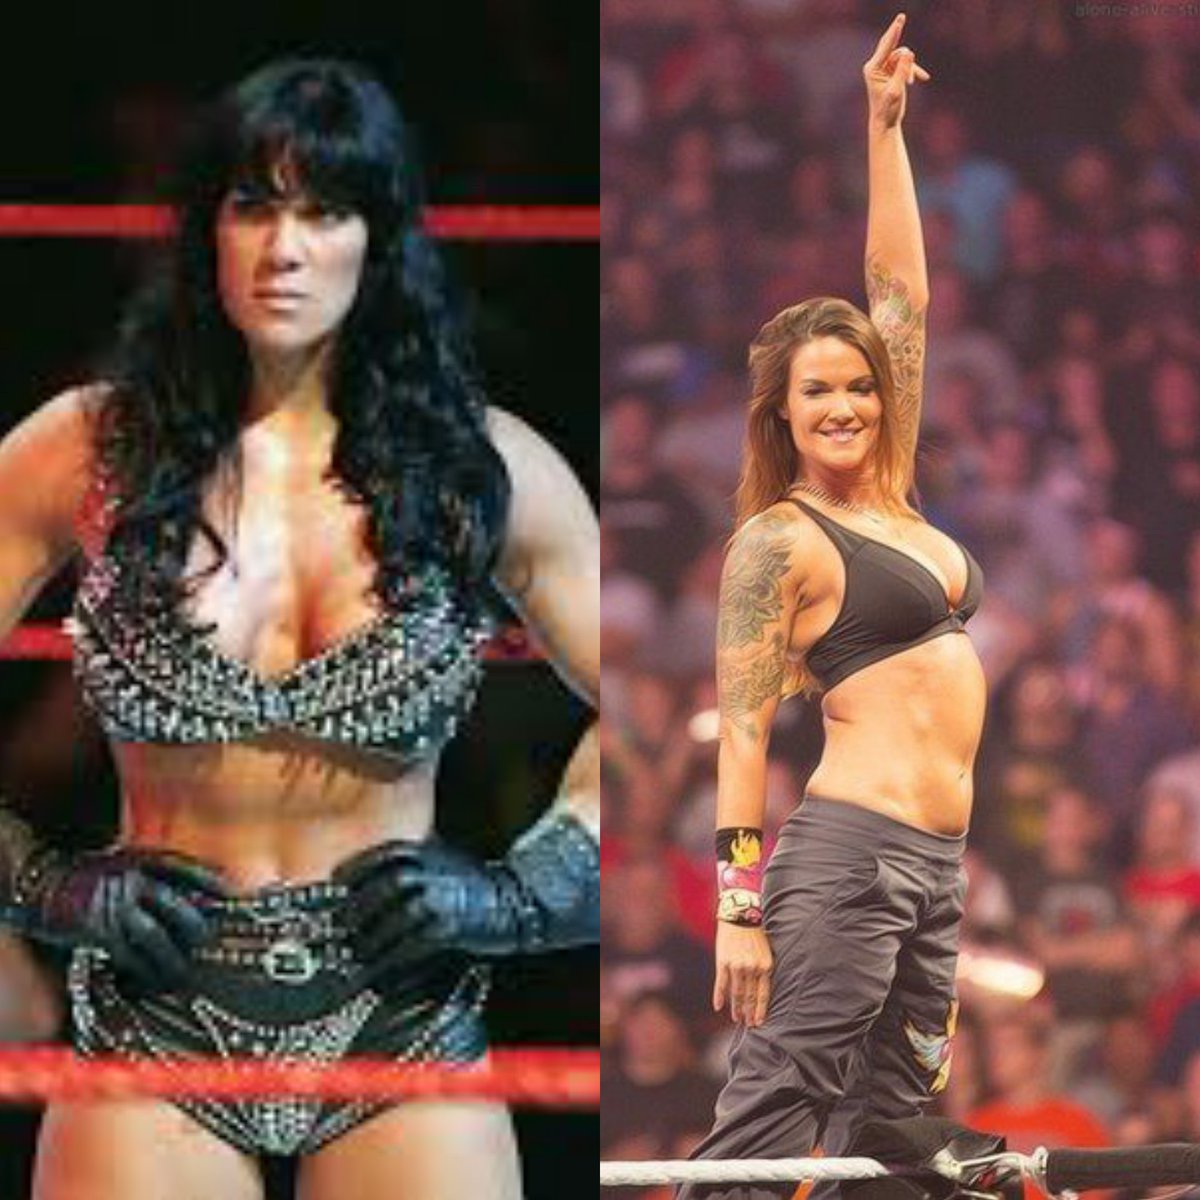 #Chyna or #Lita RT for #Chyna Like for #Lita Also comment below.